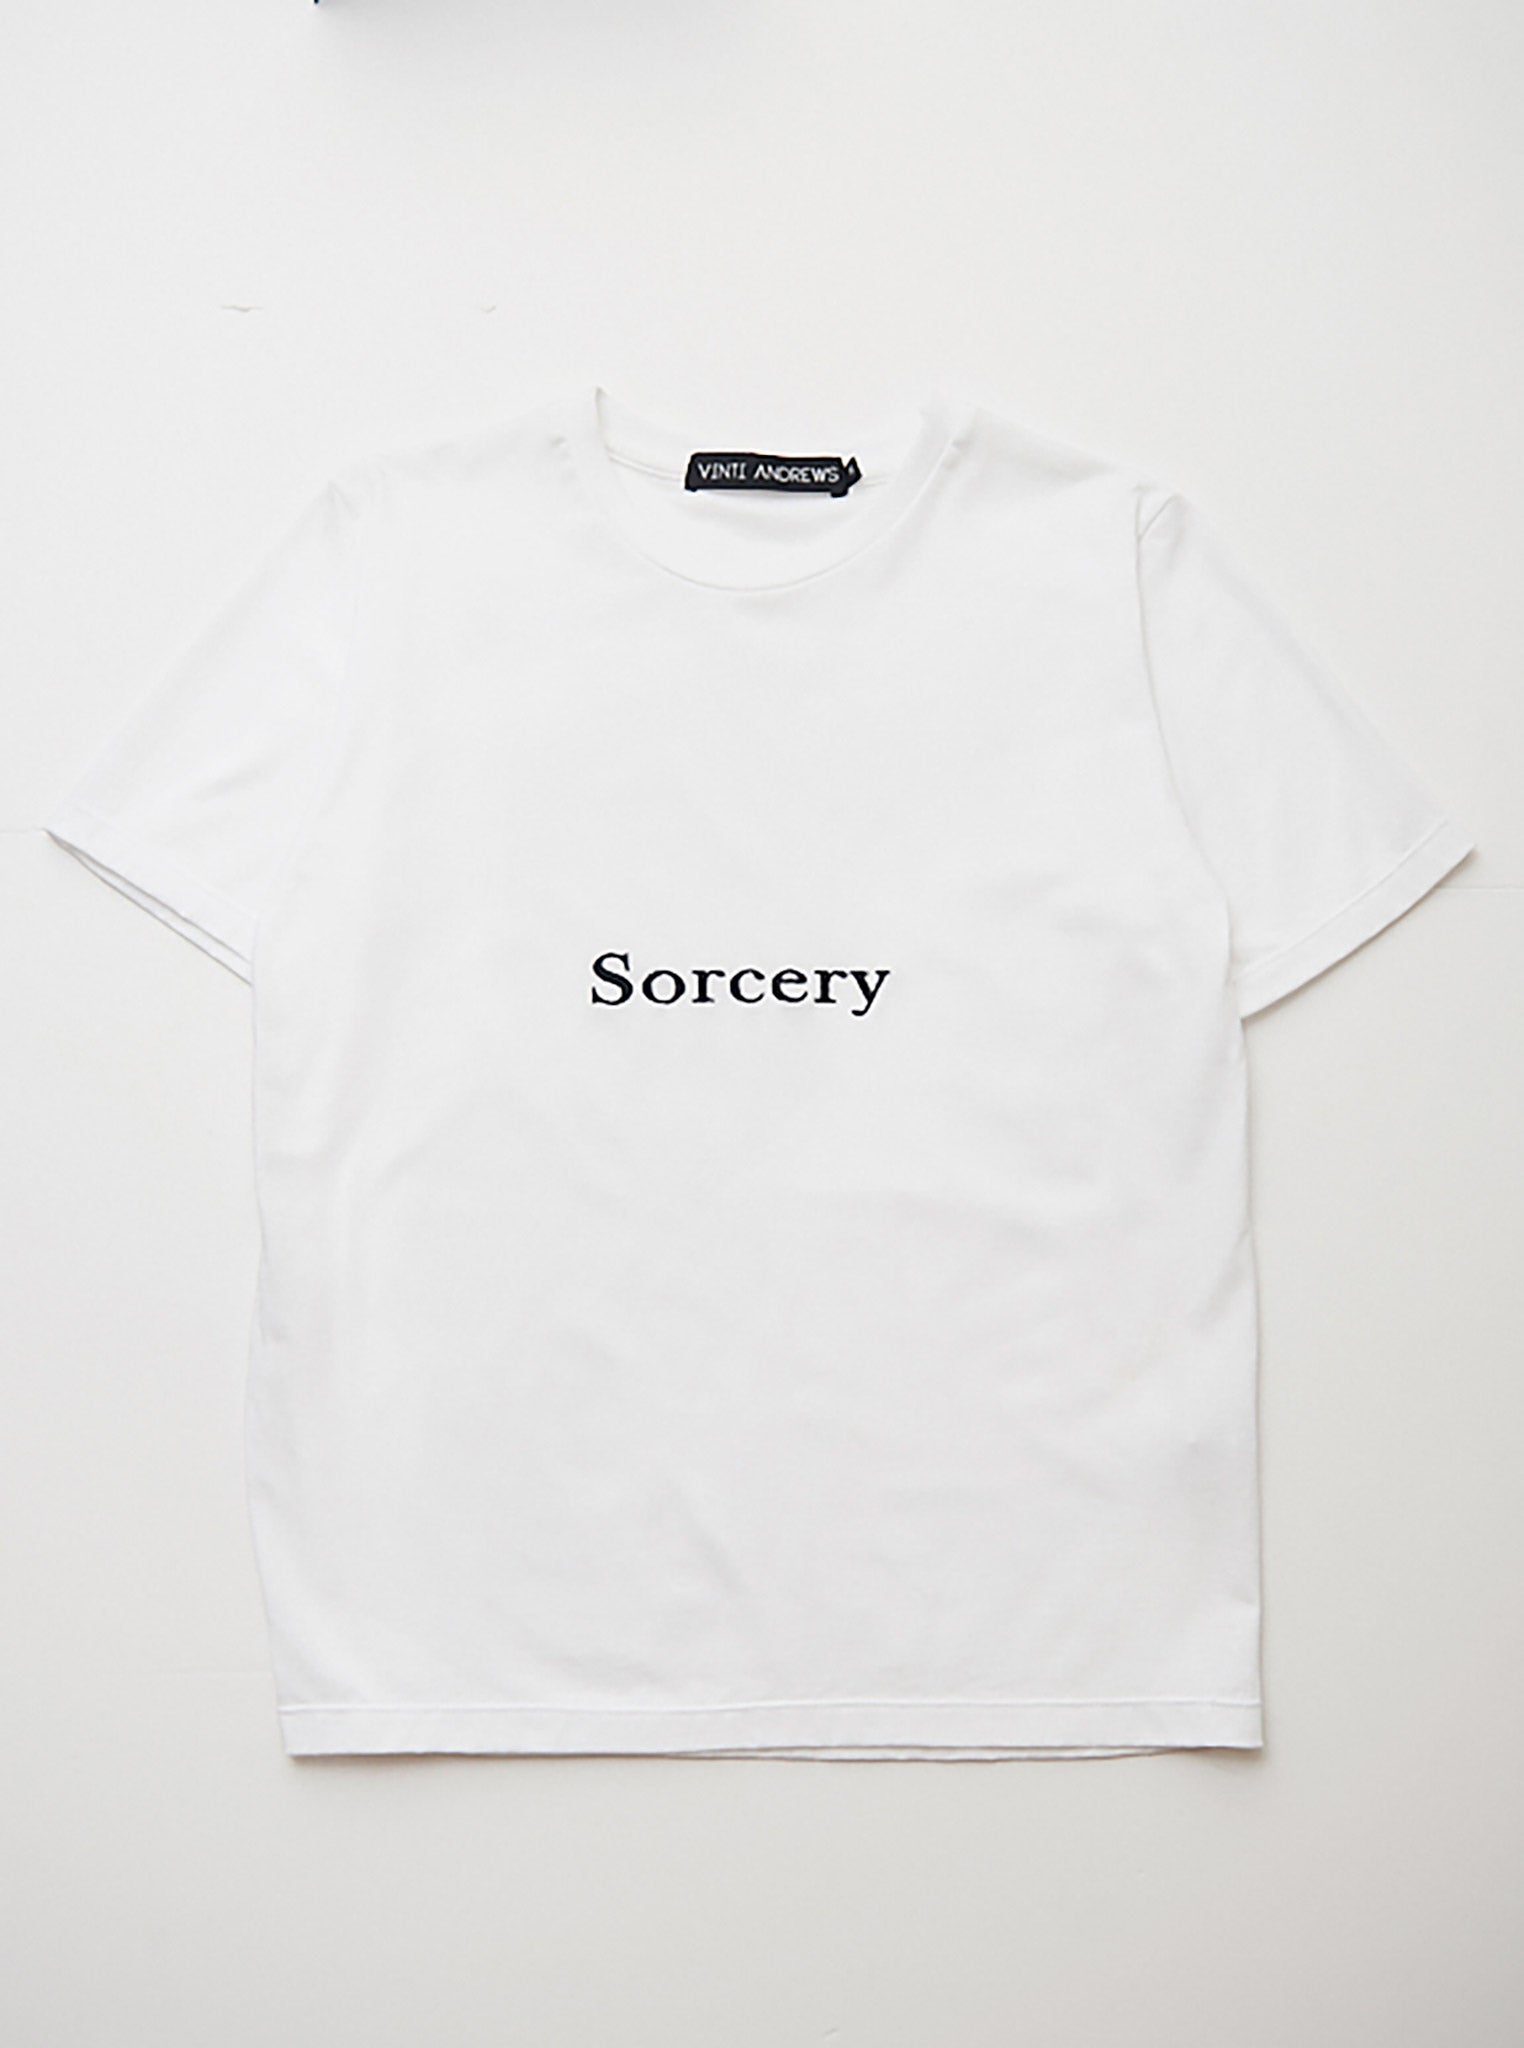 Vinti Andrews Sorcery Embroidered White T-Shirt